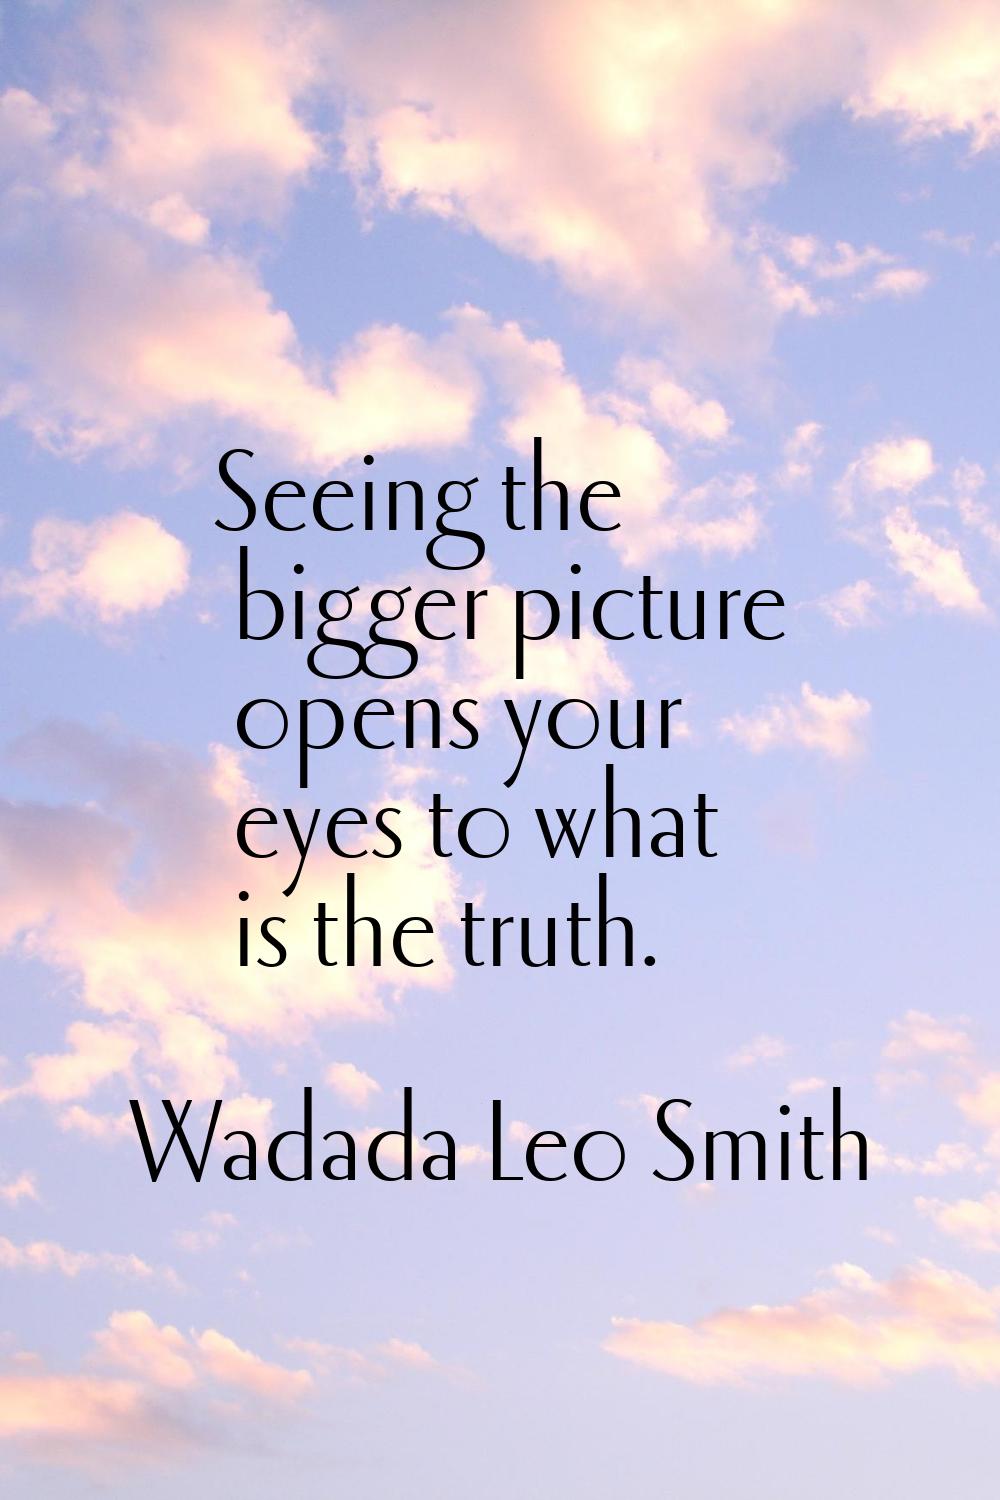 Seeing the bigger picture opens your eyes to what is the truth.